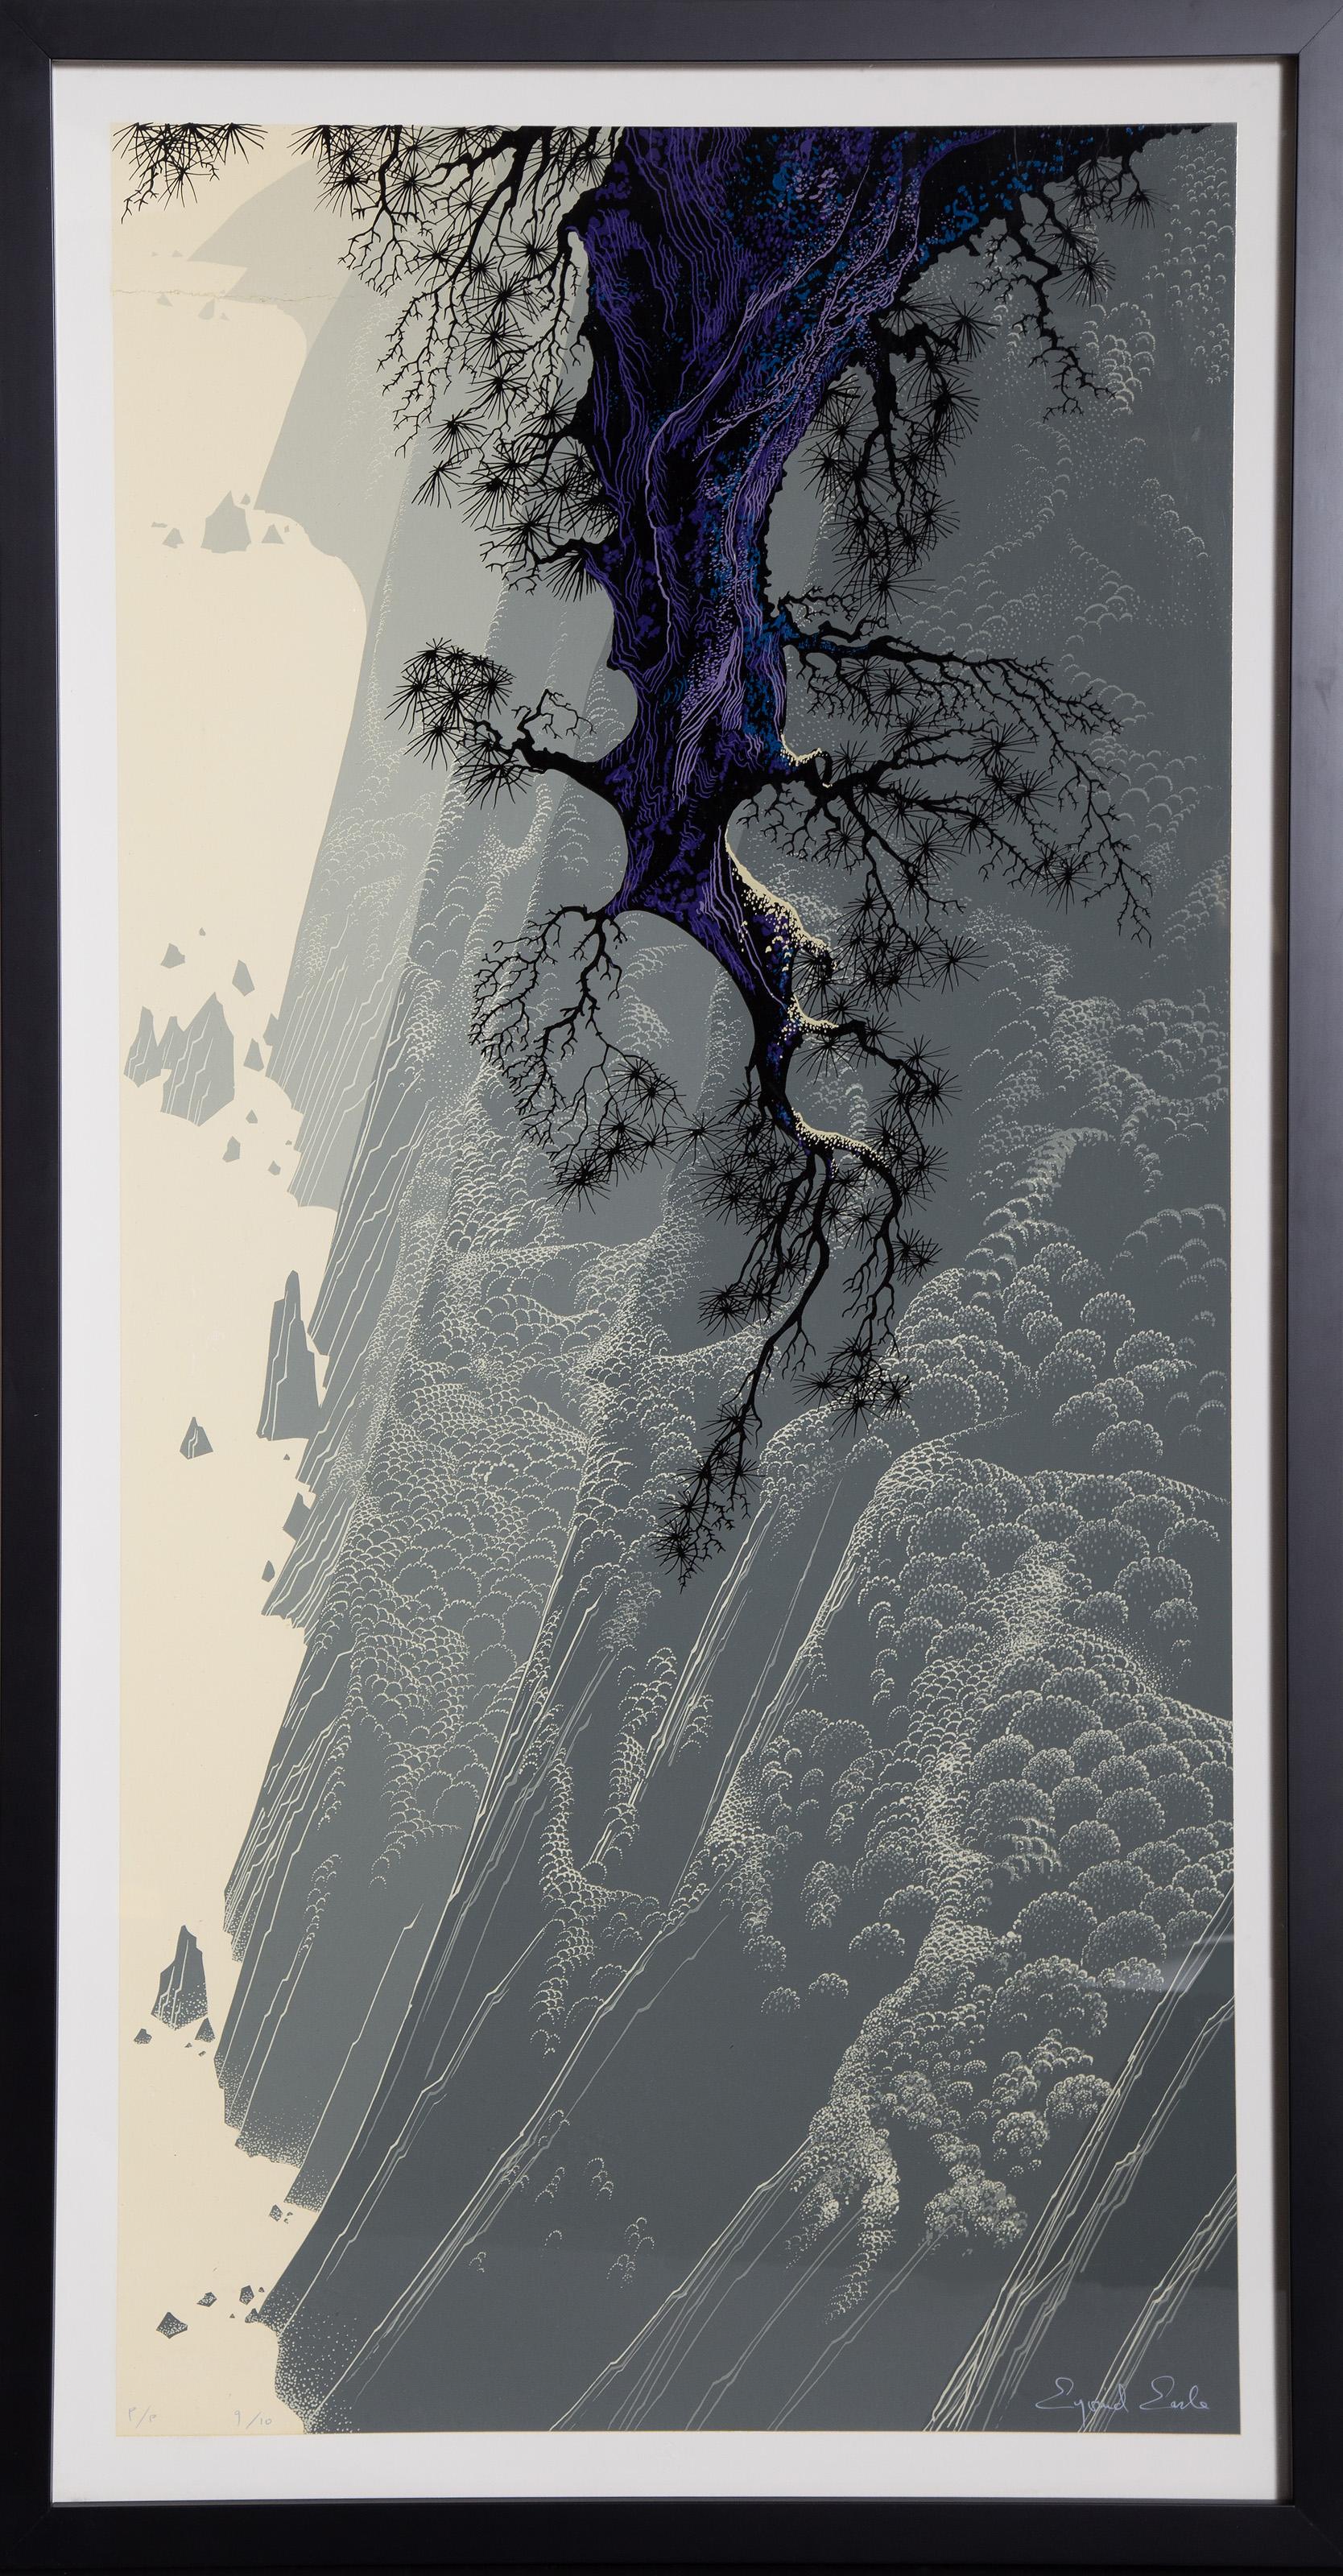 Mountain Rise
Eyvind Earle, American (1916–2000)
Date: 1979
Screenprint, signed and numbered in pencil
Edition of 300, Printers Proof 9/10
Image Size: 39.5 x 19.5 inches
Size: 41.75 x 21.75 in. (106.05 x 55.25 cm)
Frame Size: 44 x 24 inches
Printer: